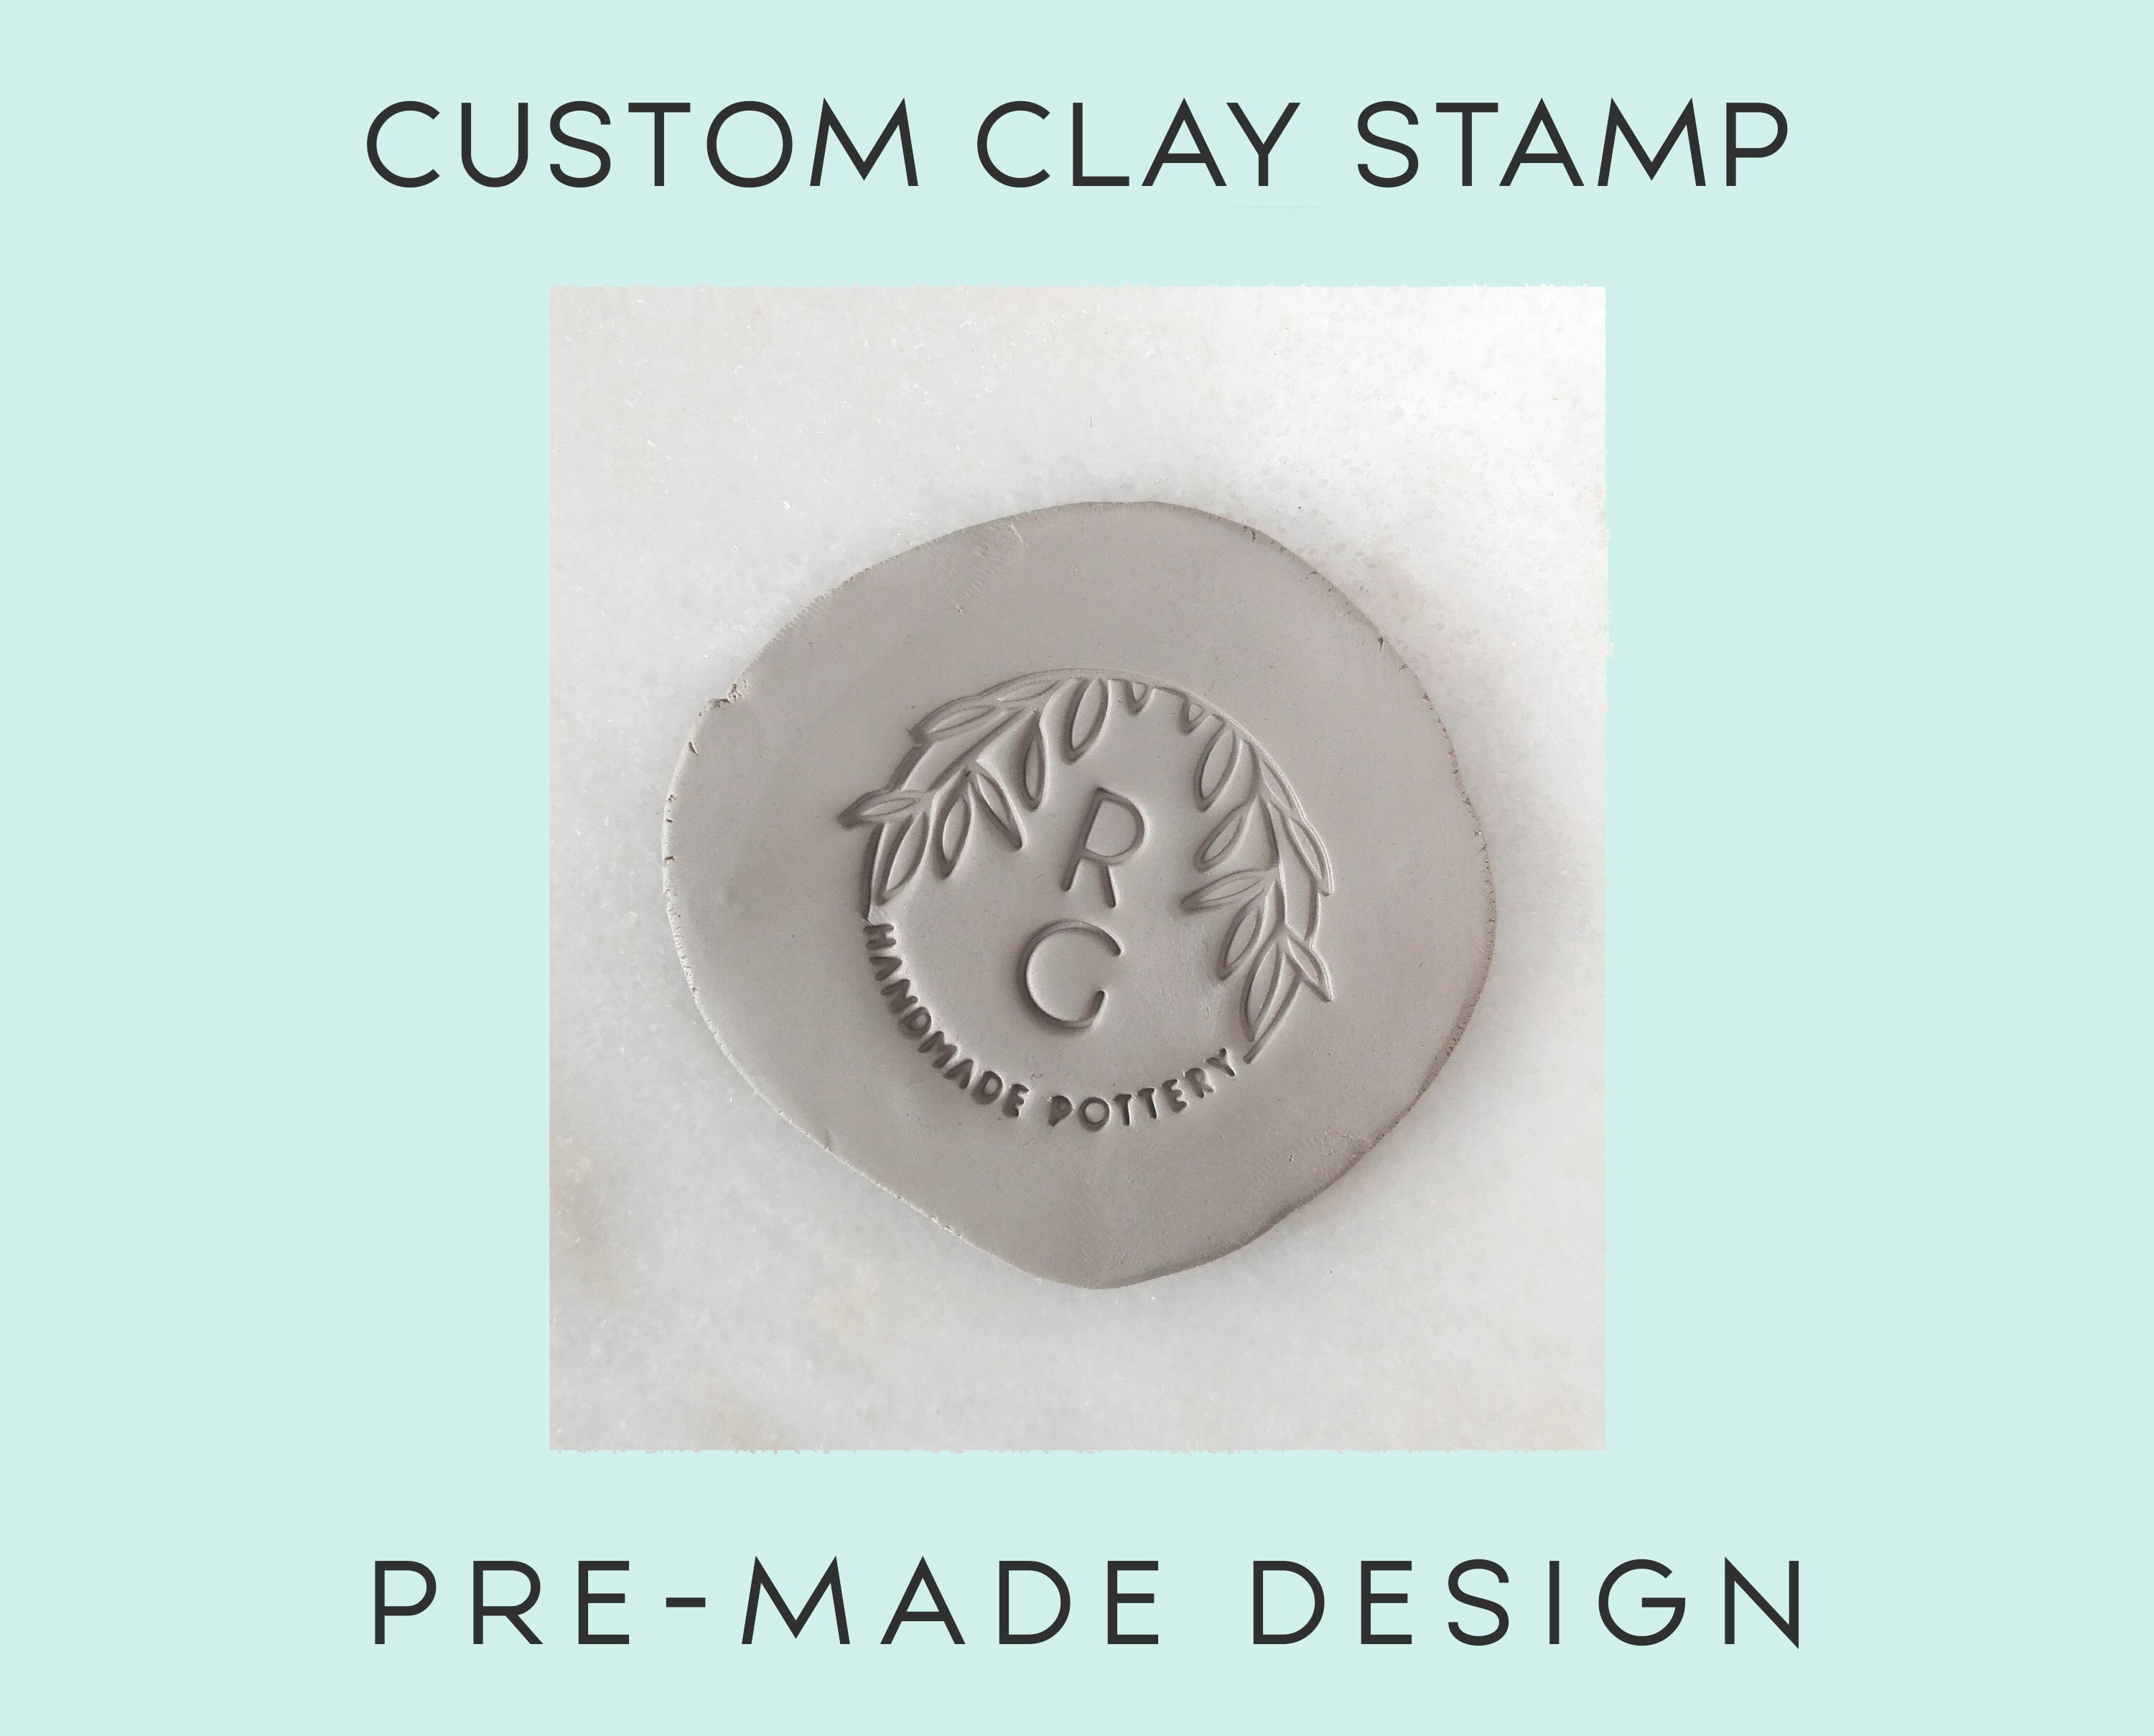 Pottery Stamp Designs